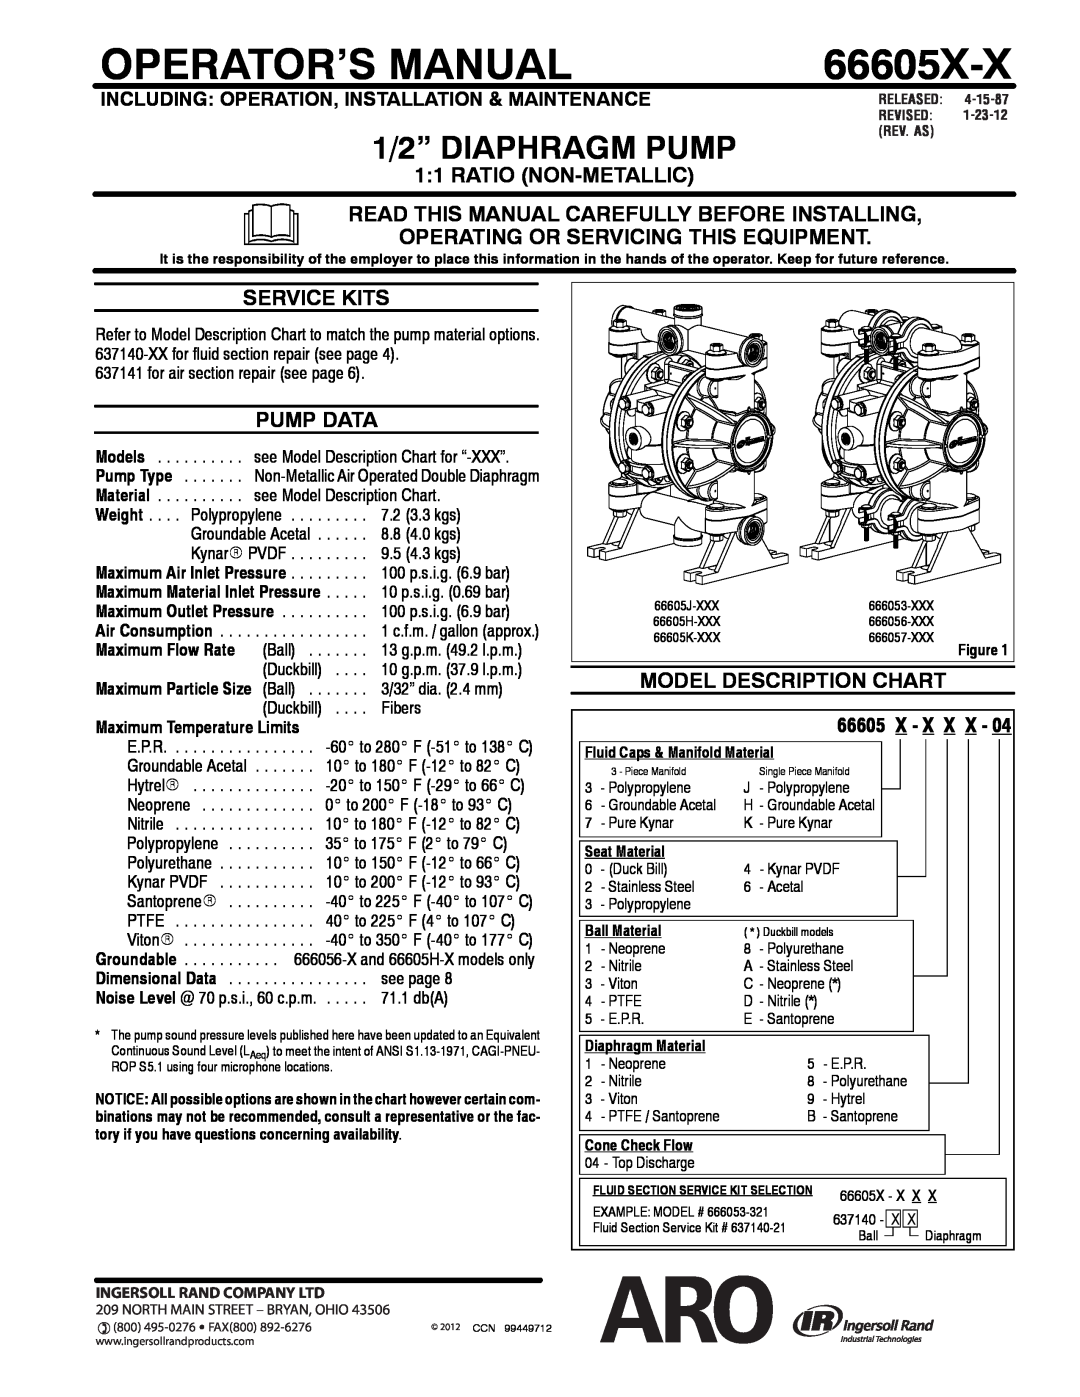 Ingersoll-Rand 66605X-X manual 1 1 RATIO NON-METALLIC, Read This Manual Carefully Before Installing, Service Kits 